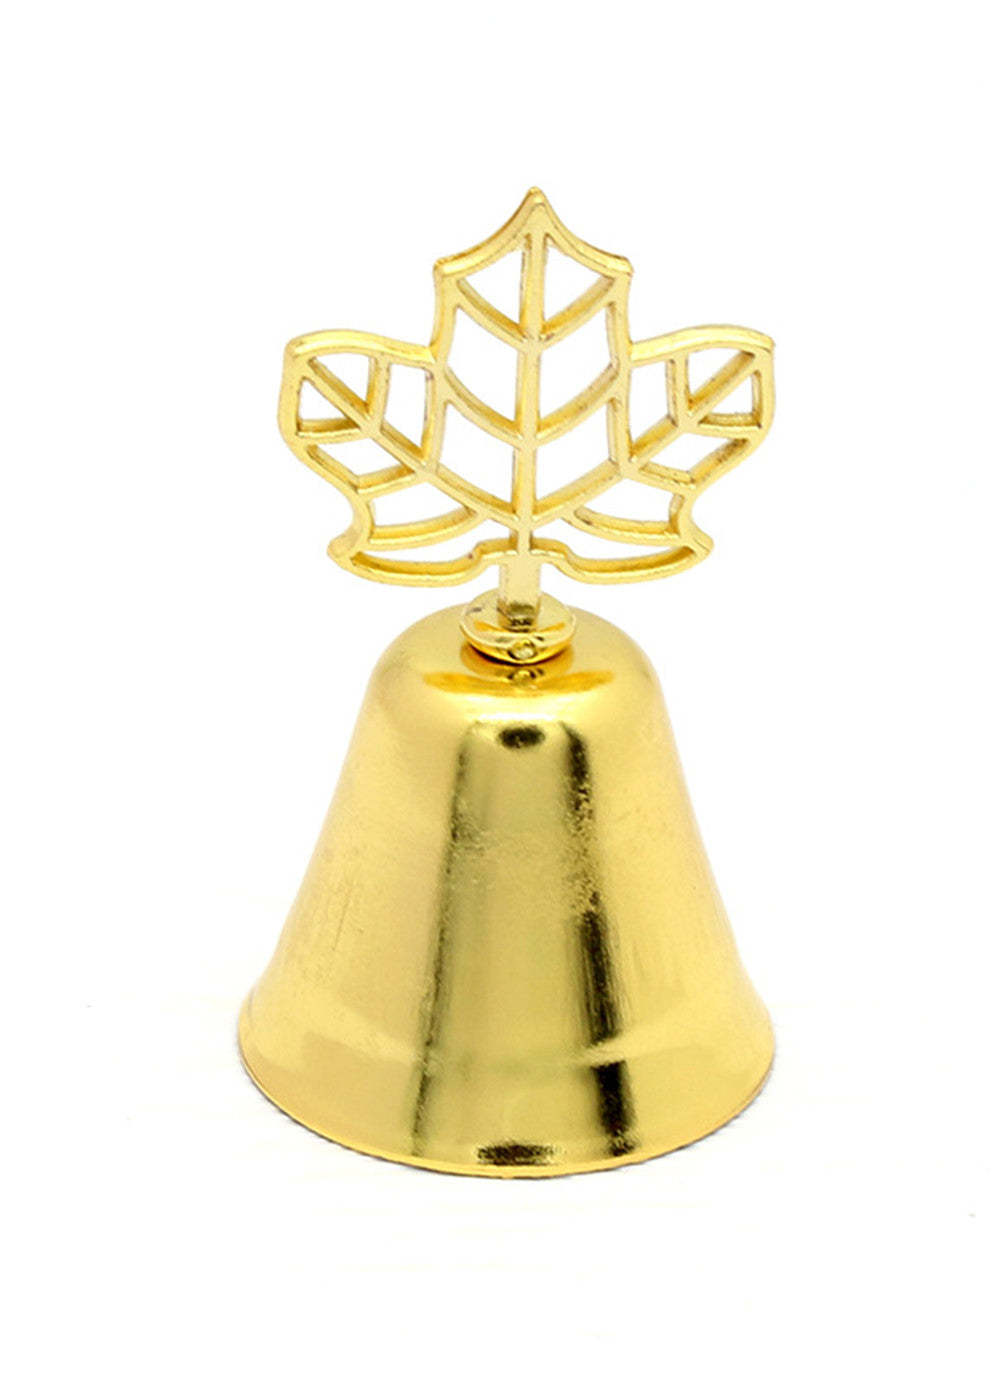 Cute Gold and Silver Bell Place Cards Holder (SET OF 5)